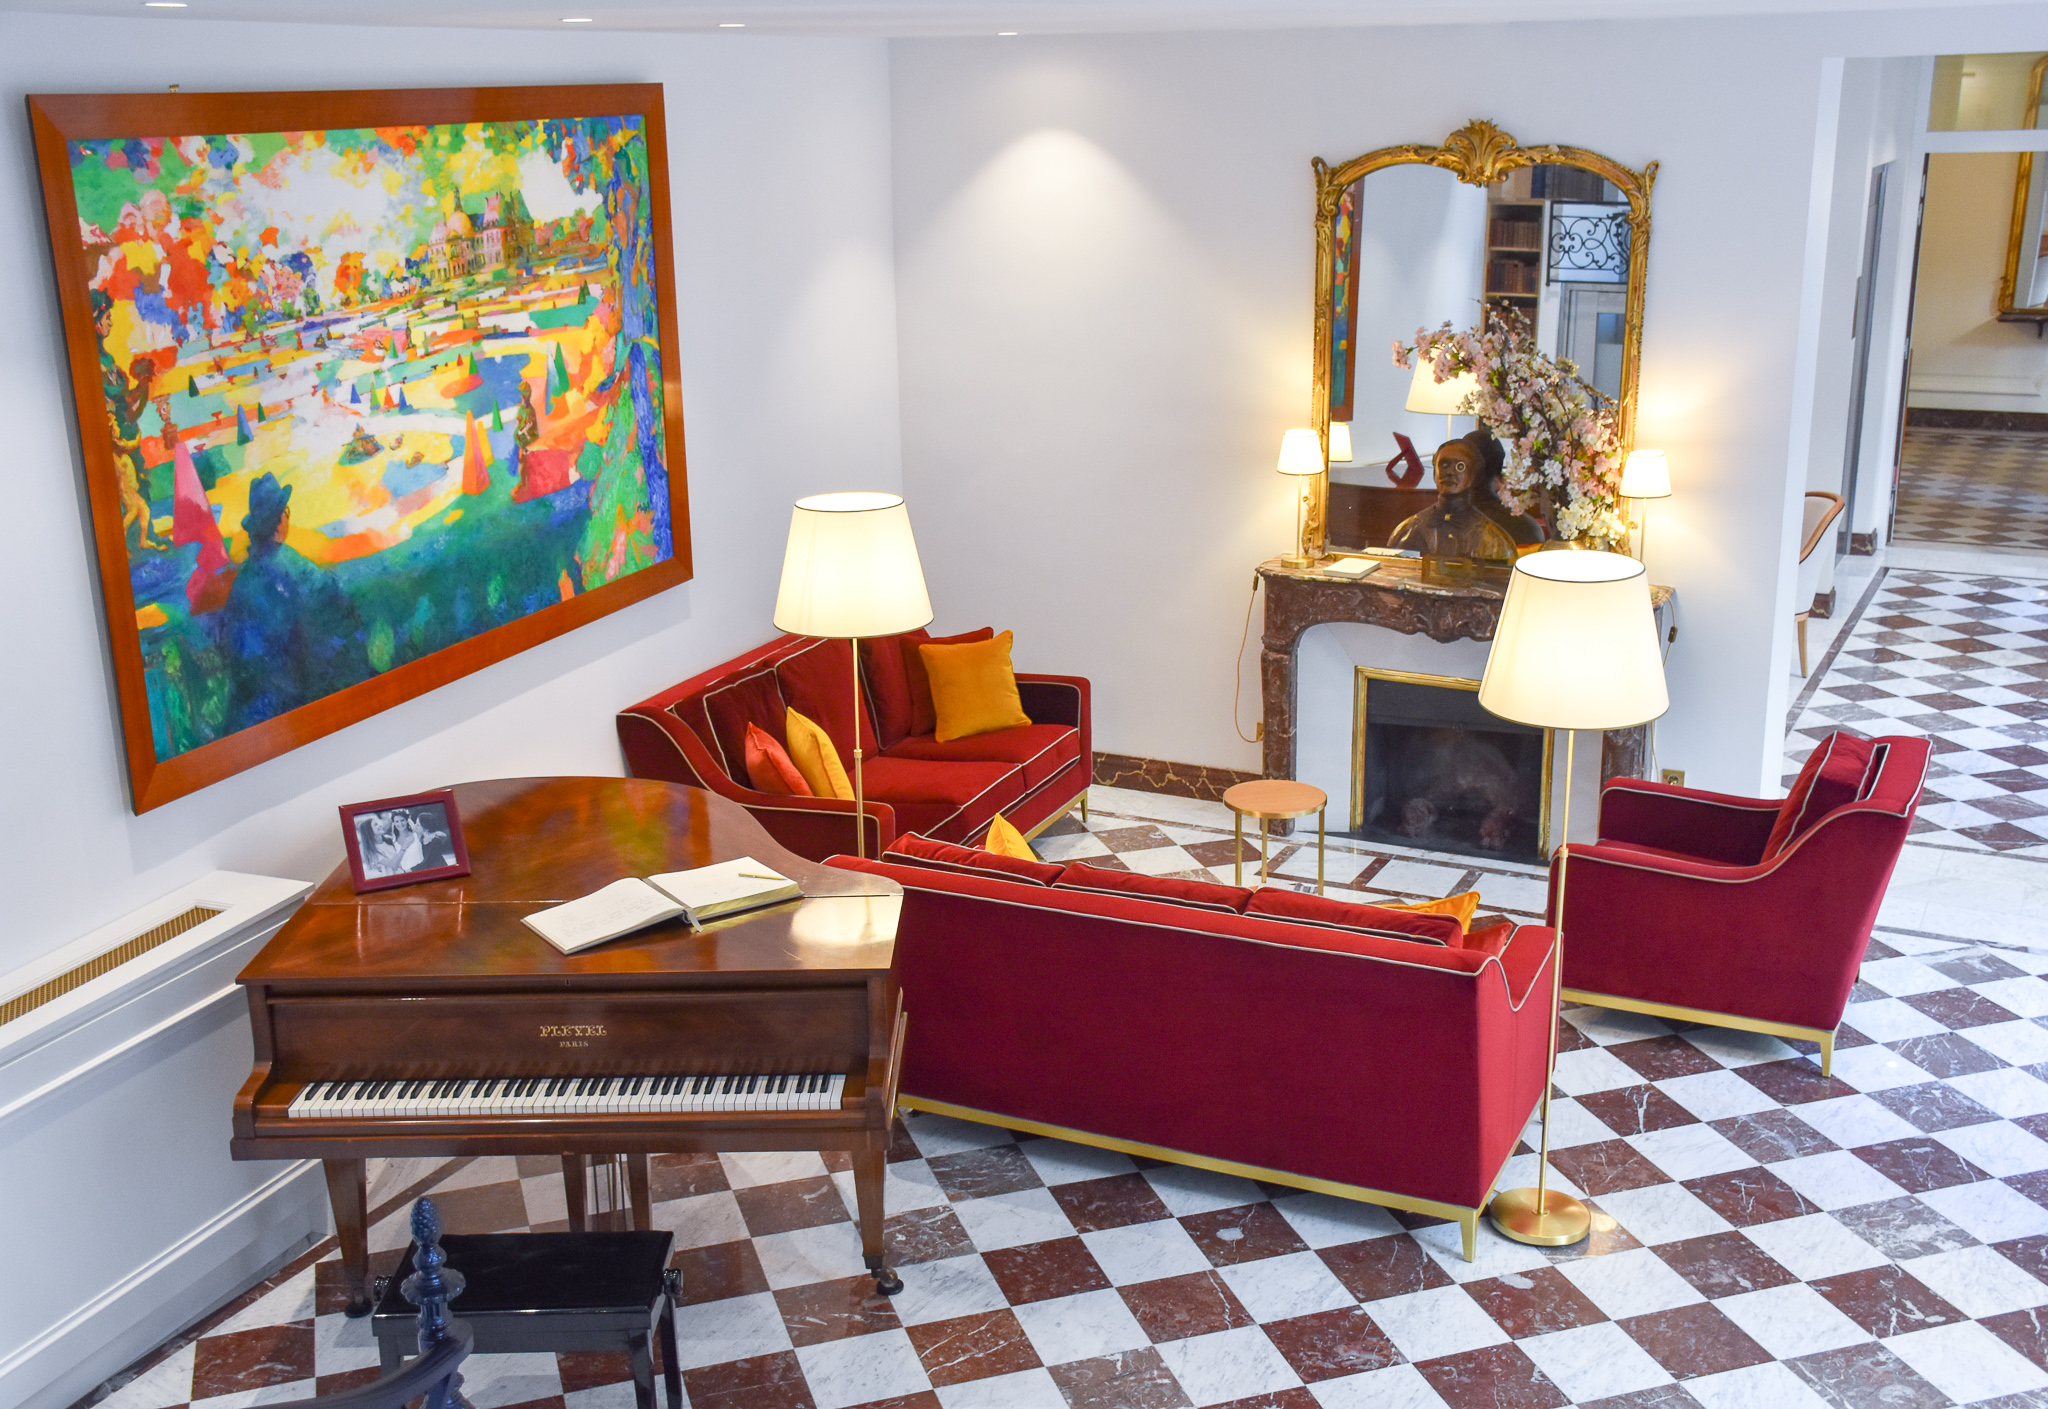 Hôtel Alfred Sommier Review: A Boutique Luxury Stay in the Heart of Paris